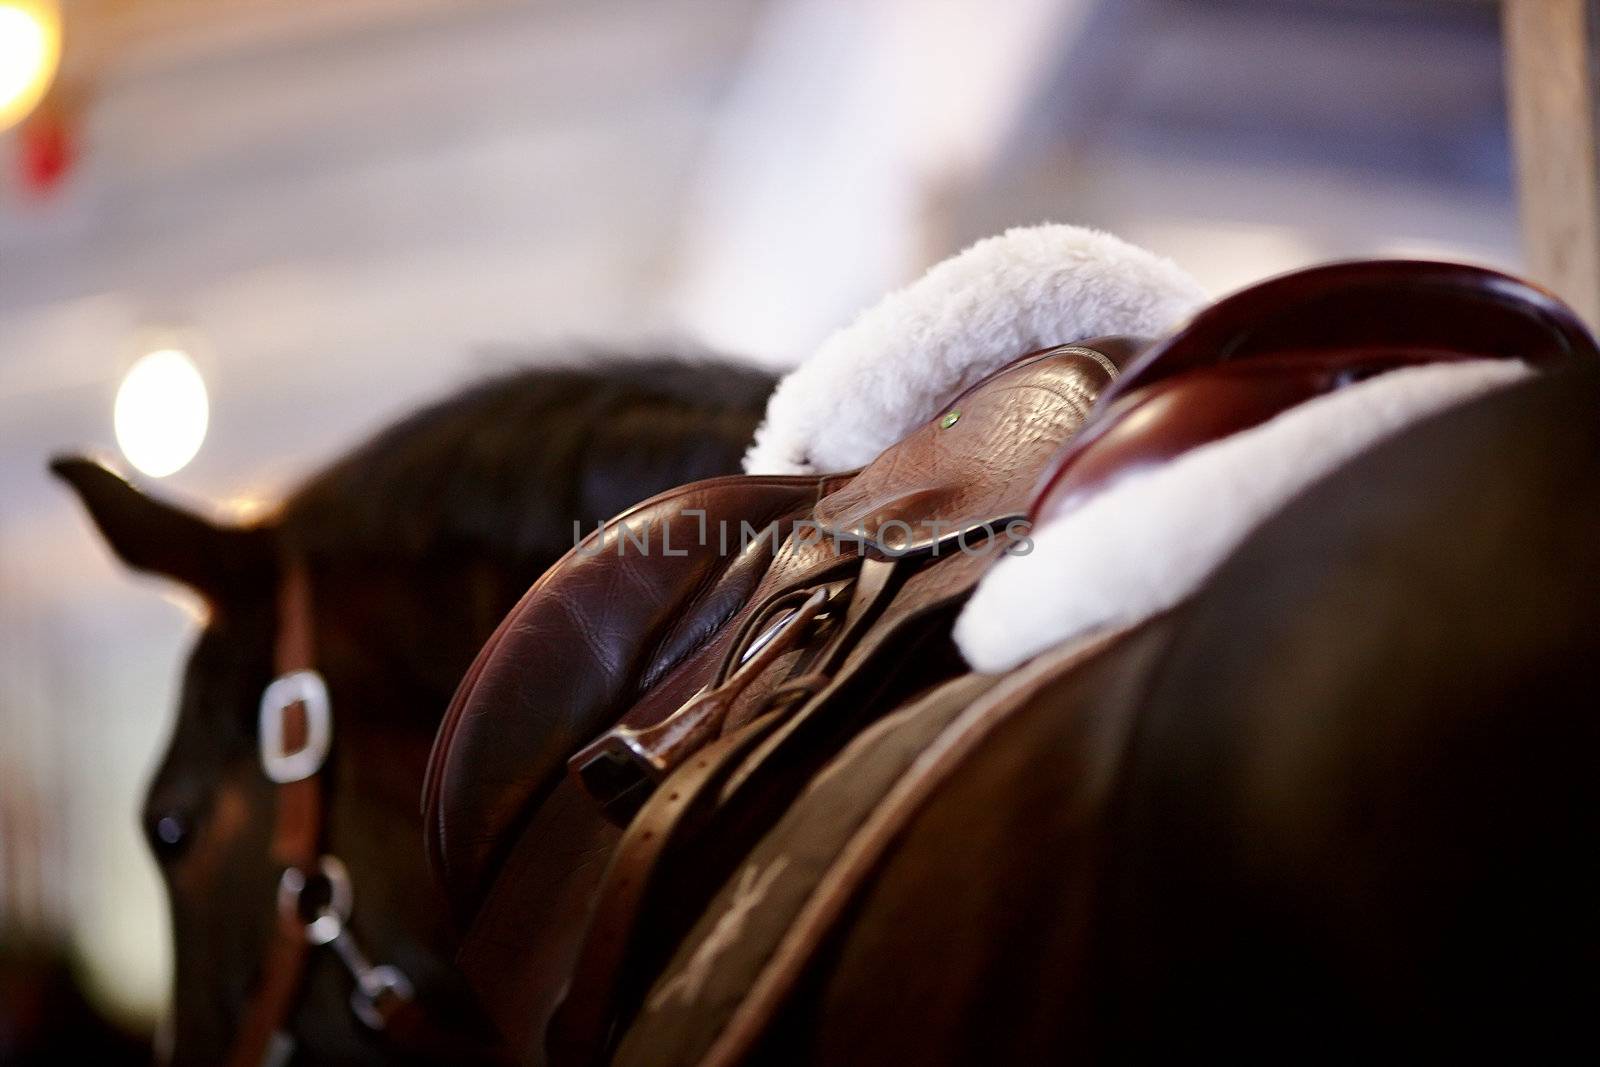 Saddle with stirrups on a back of a horse